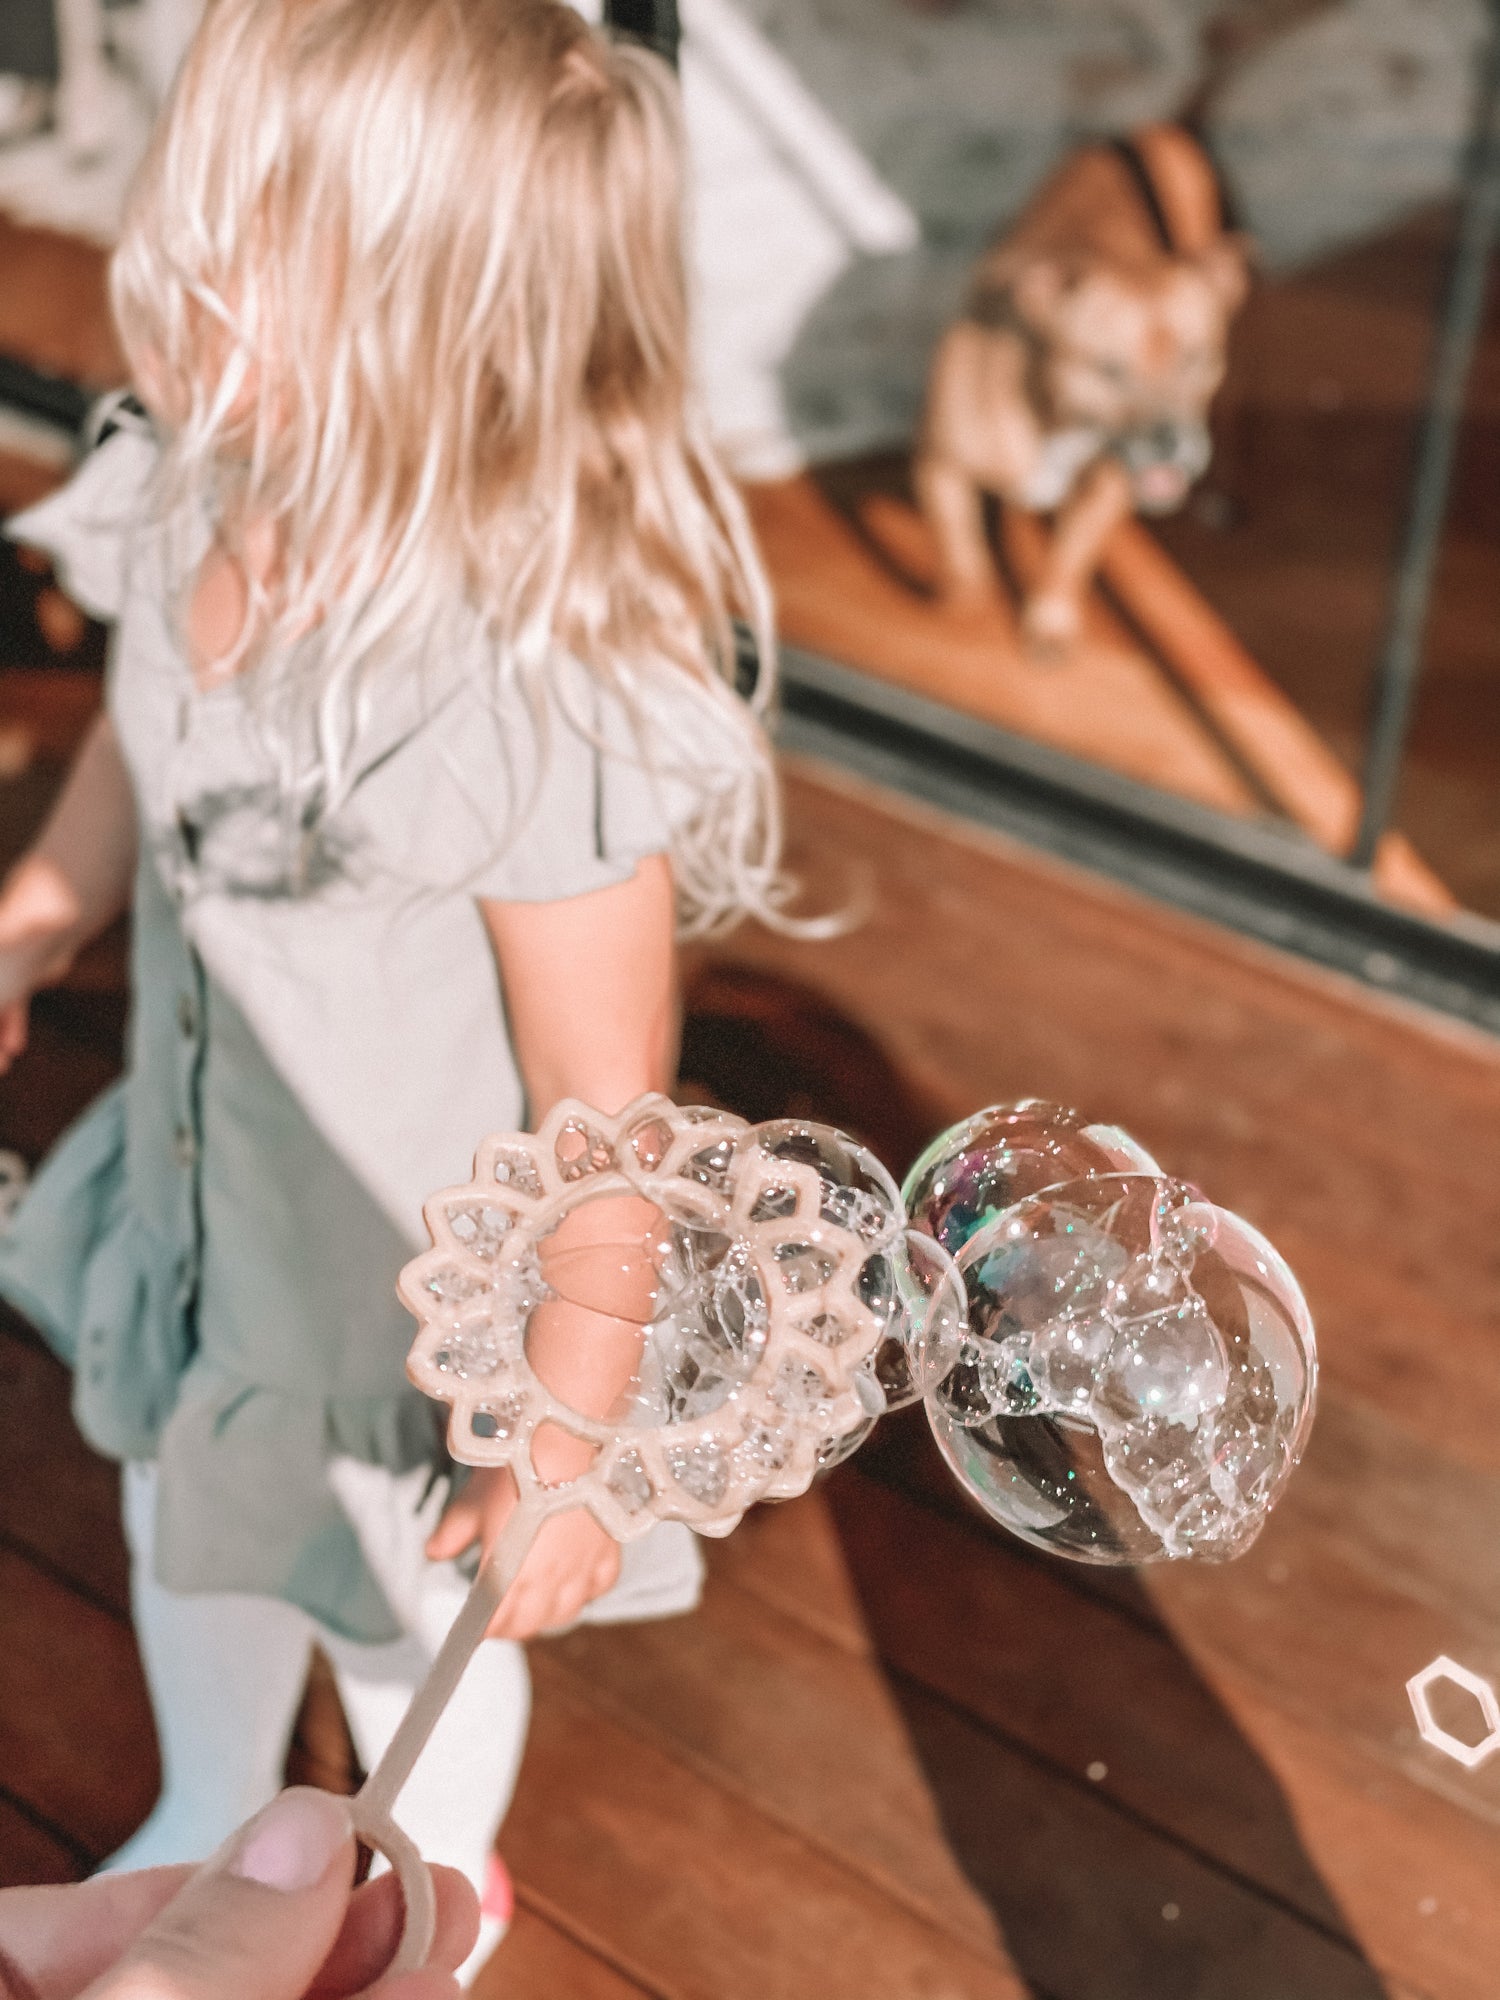 Young child with Sunflower shaped bubble wand blowing bubbles. Australian made, all natural bubble wand which is biodegradable, from Kinfolk Pantry.